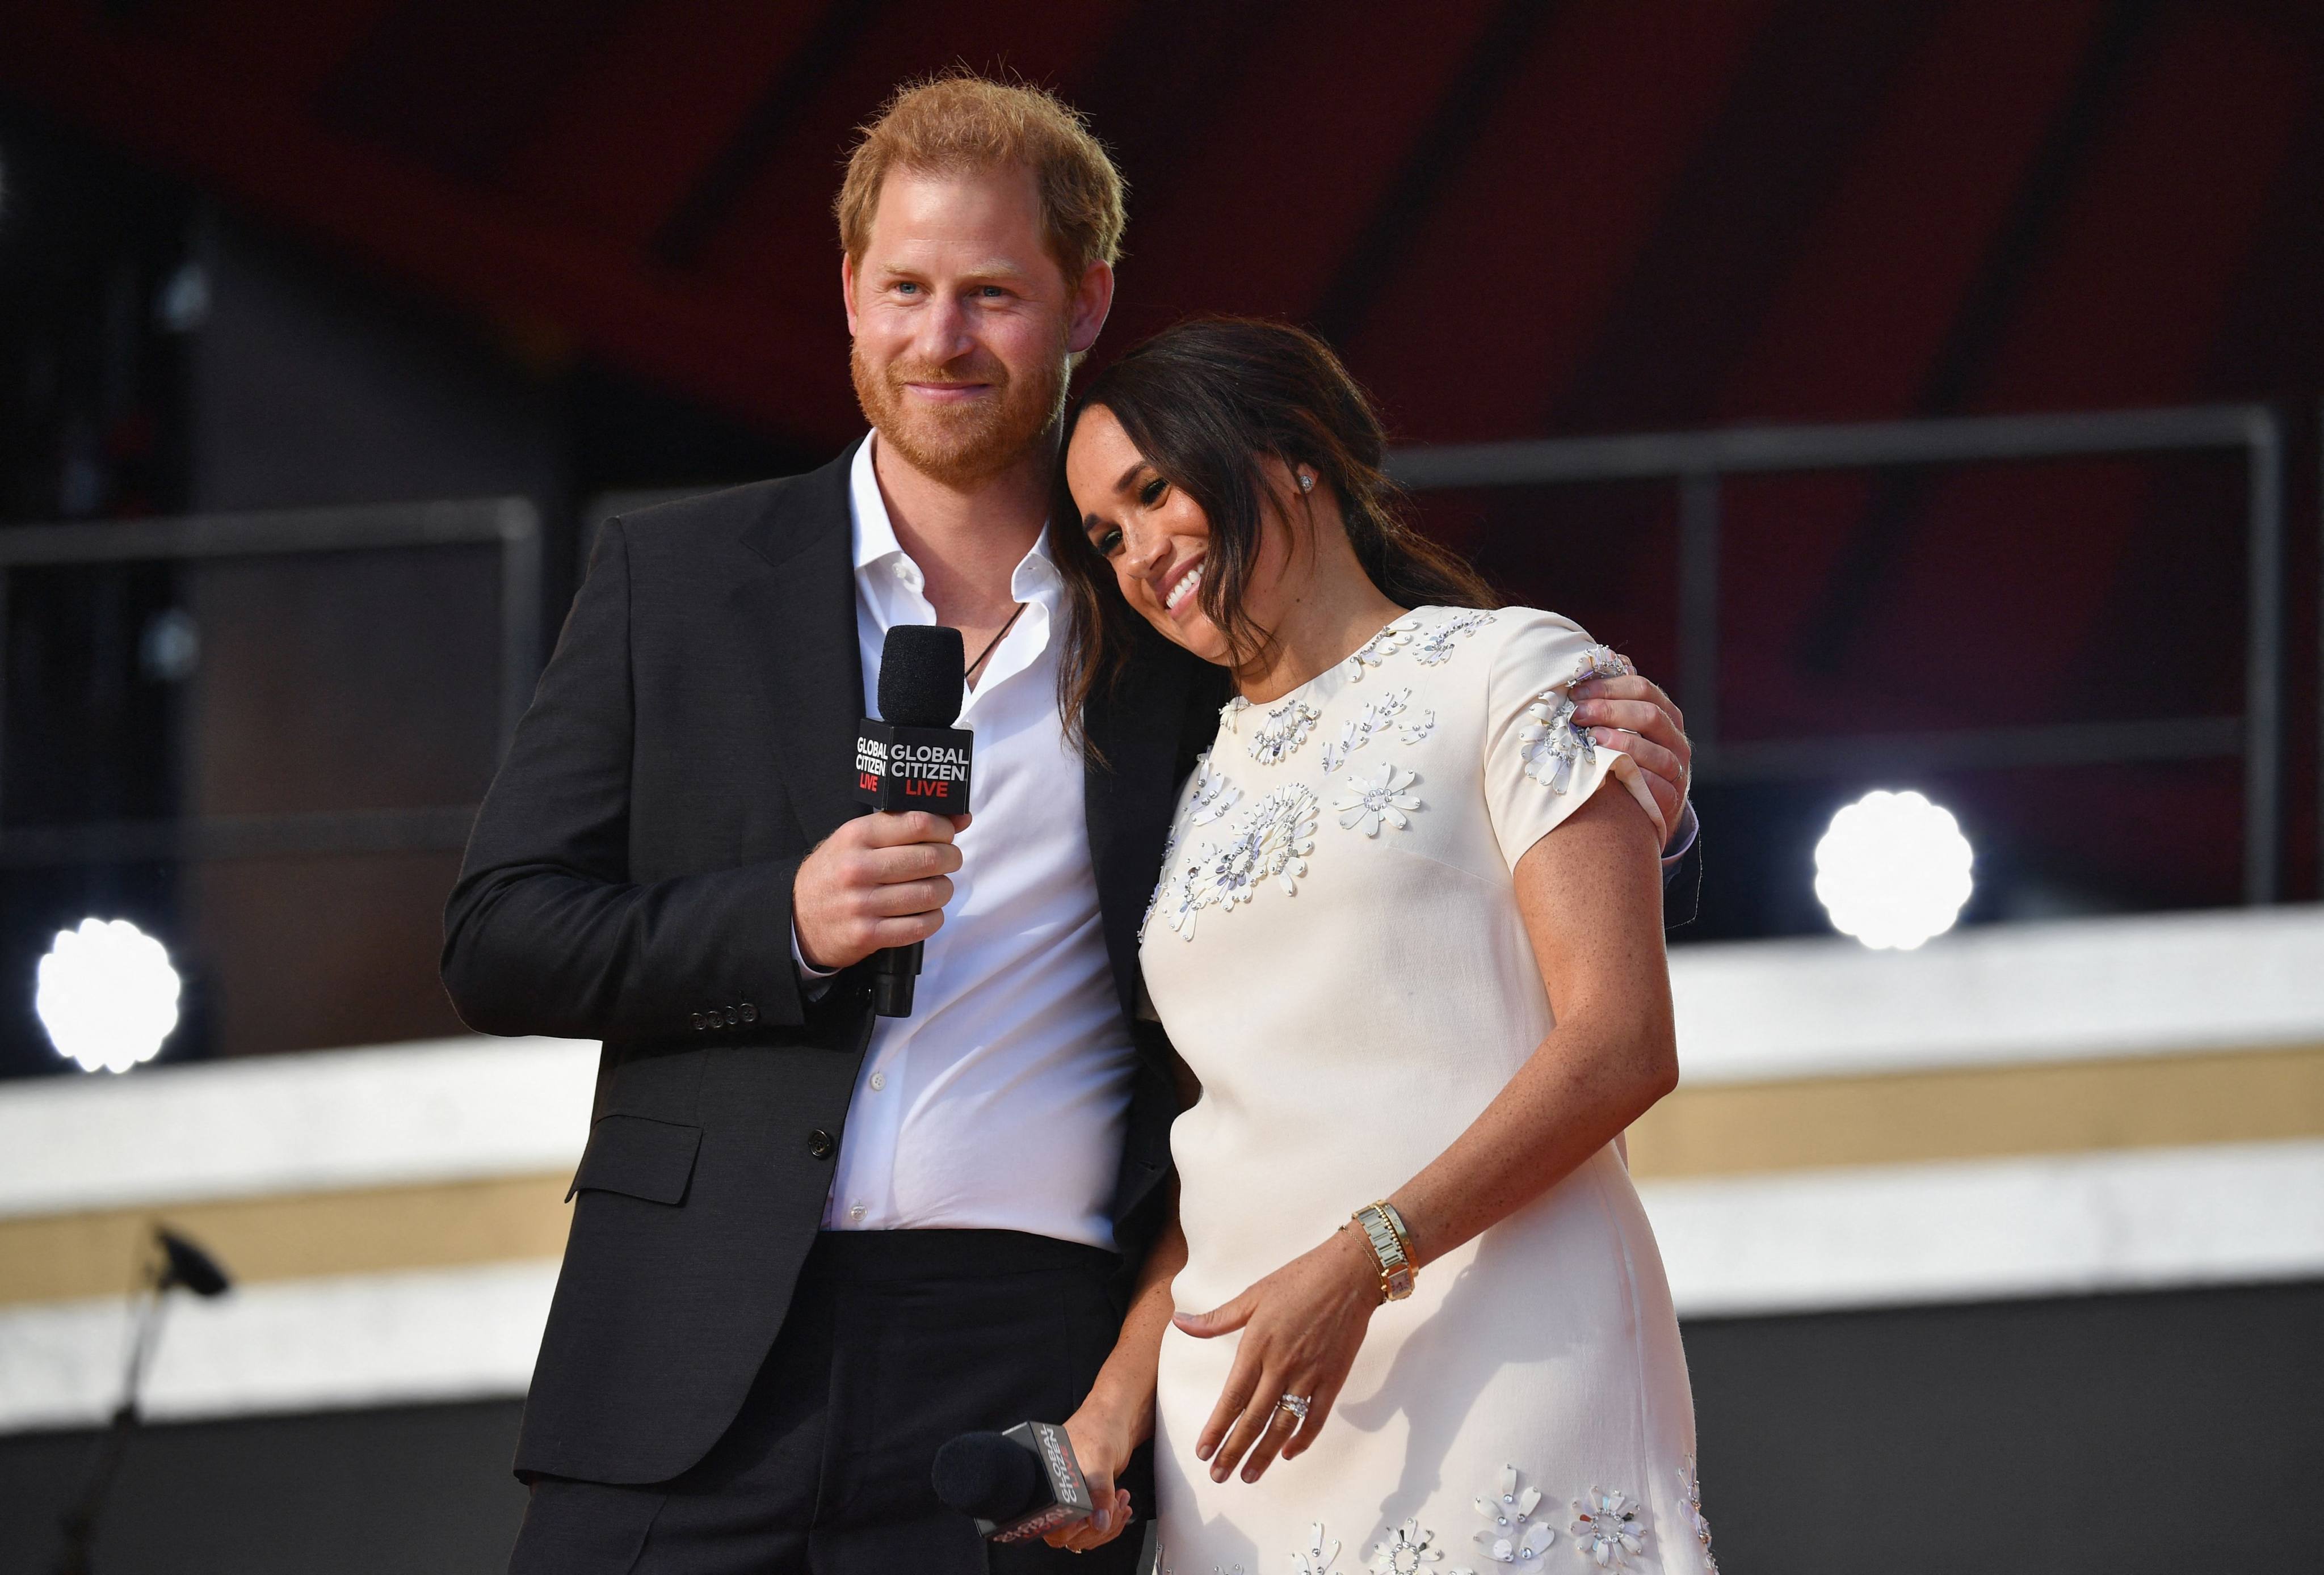 Prince Harry and Meghan Markle at a music festival in New York City. Photo: AFP